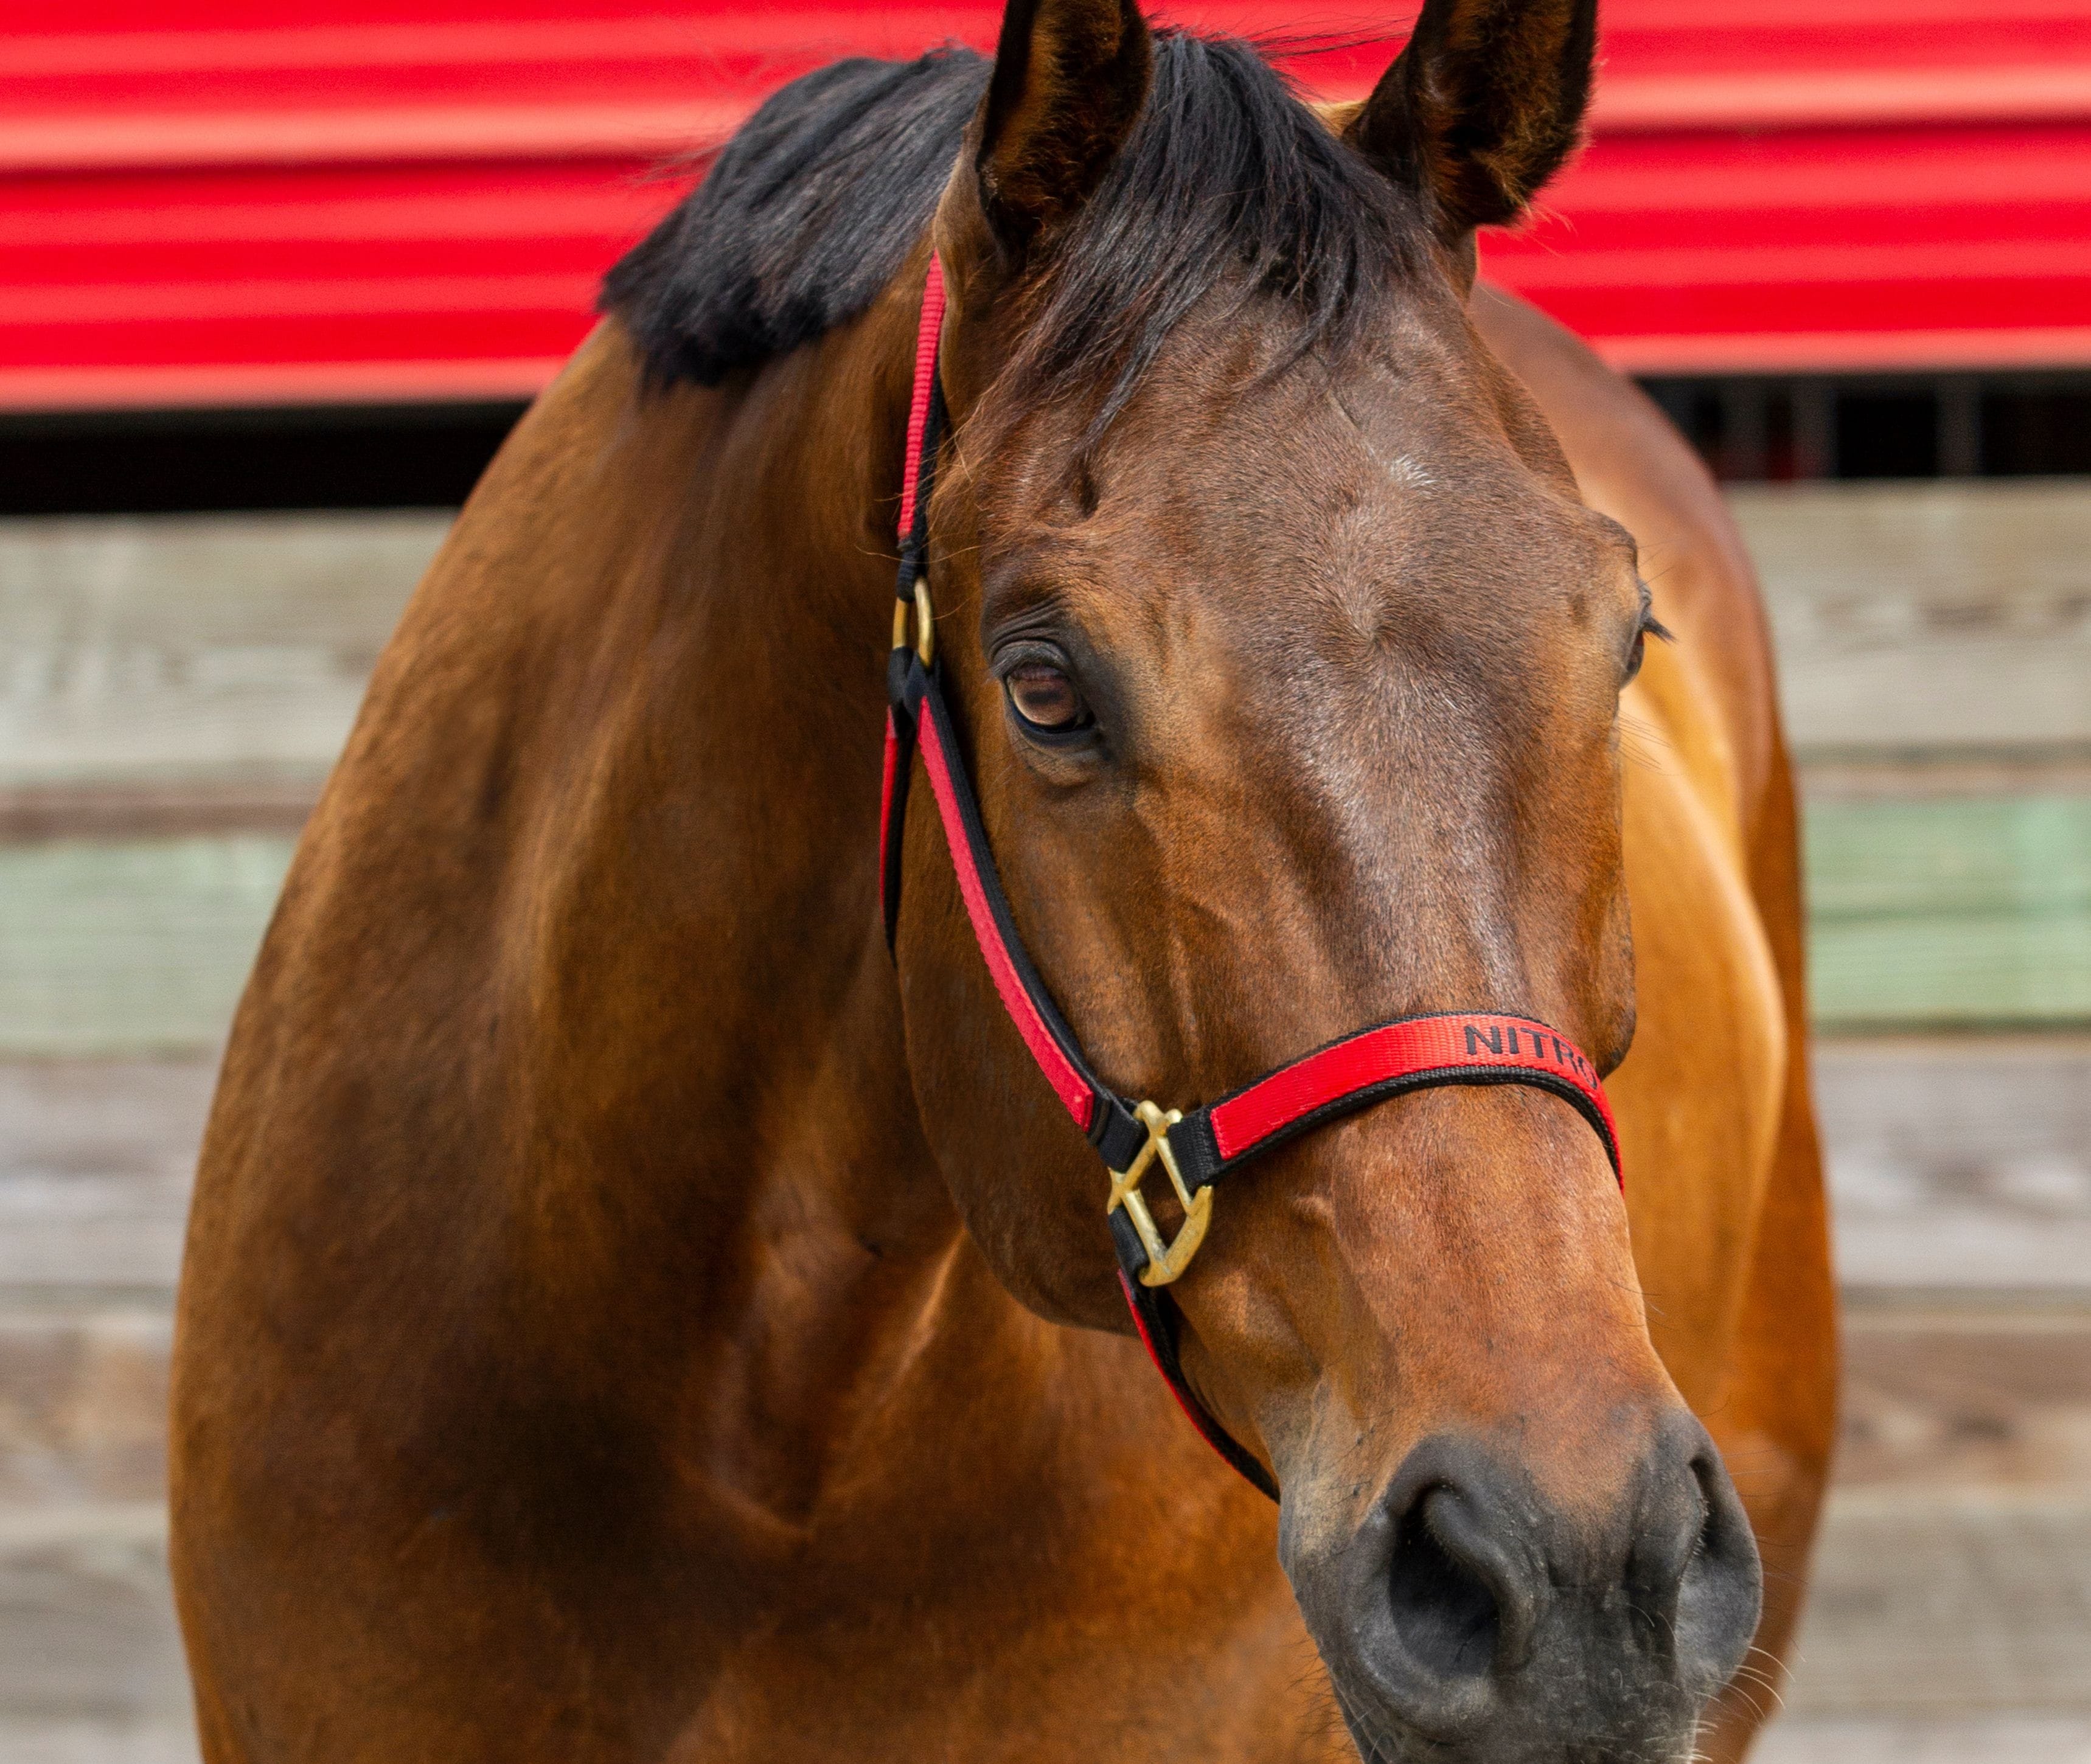 Nitro is a lesson horse at J & S Performance Horses. He is a bay gelding, wearing a red and black halter with his name on it.